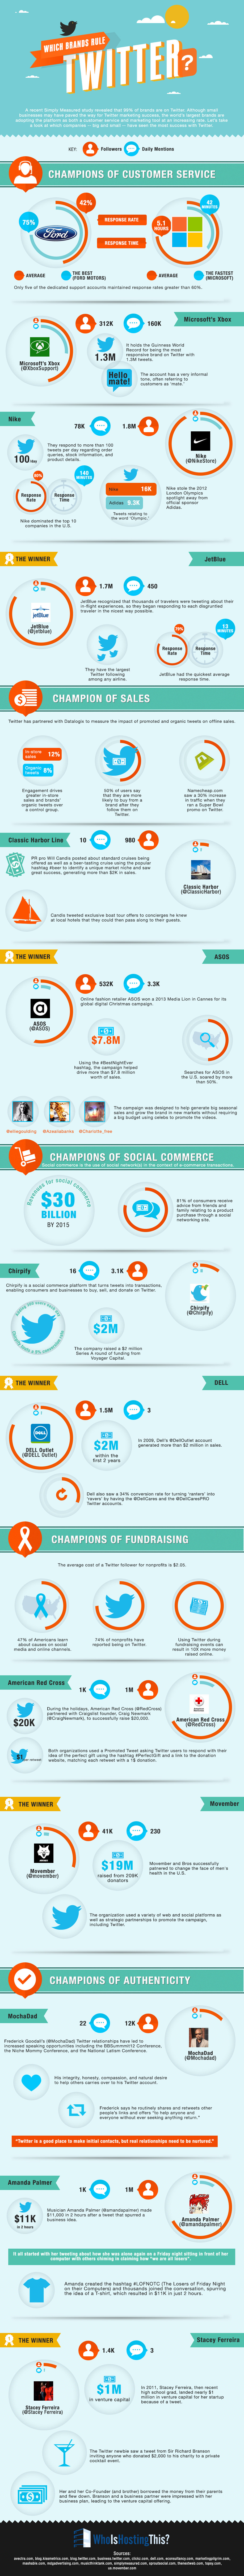 Brands on Twitter Infographic